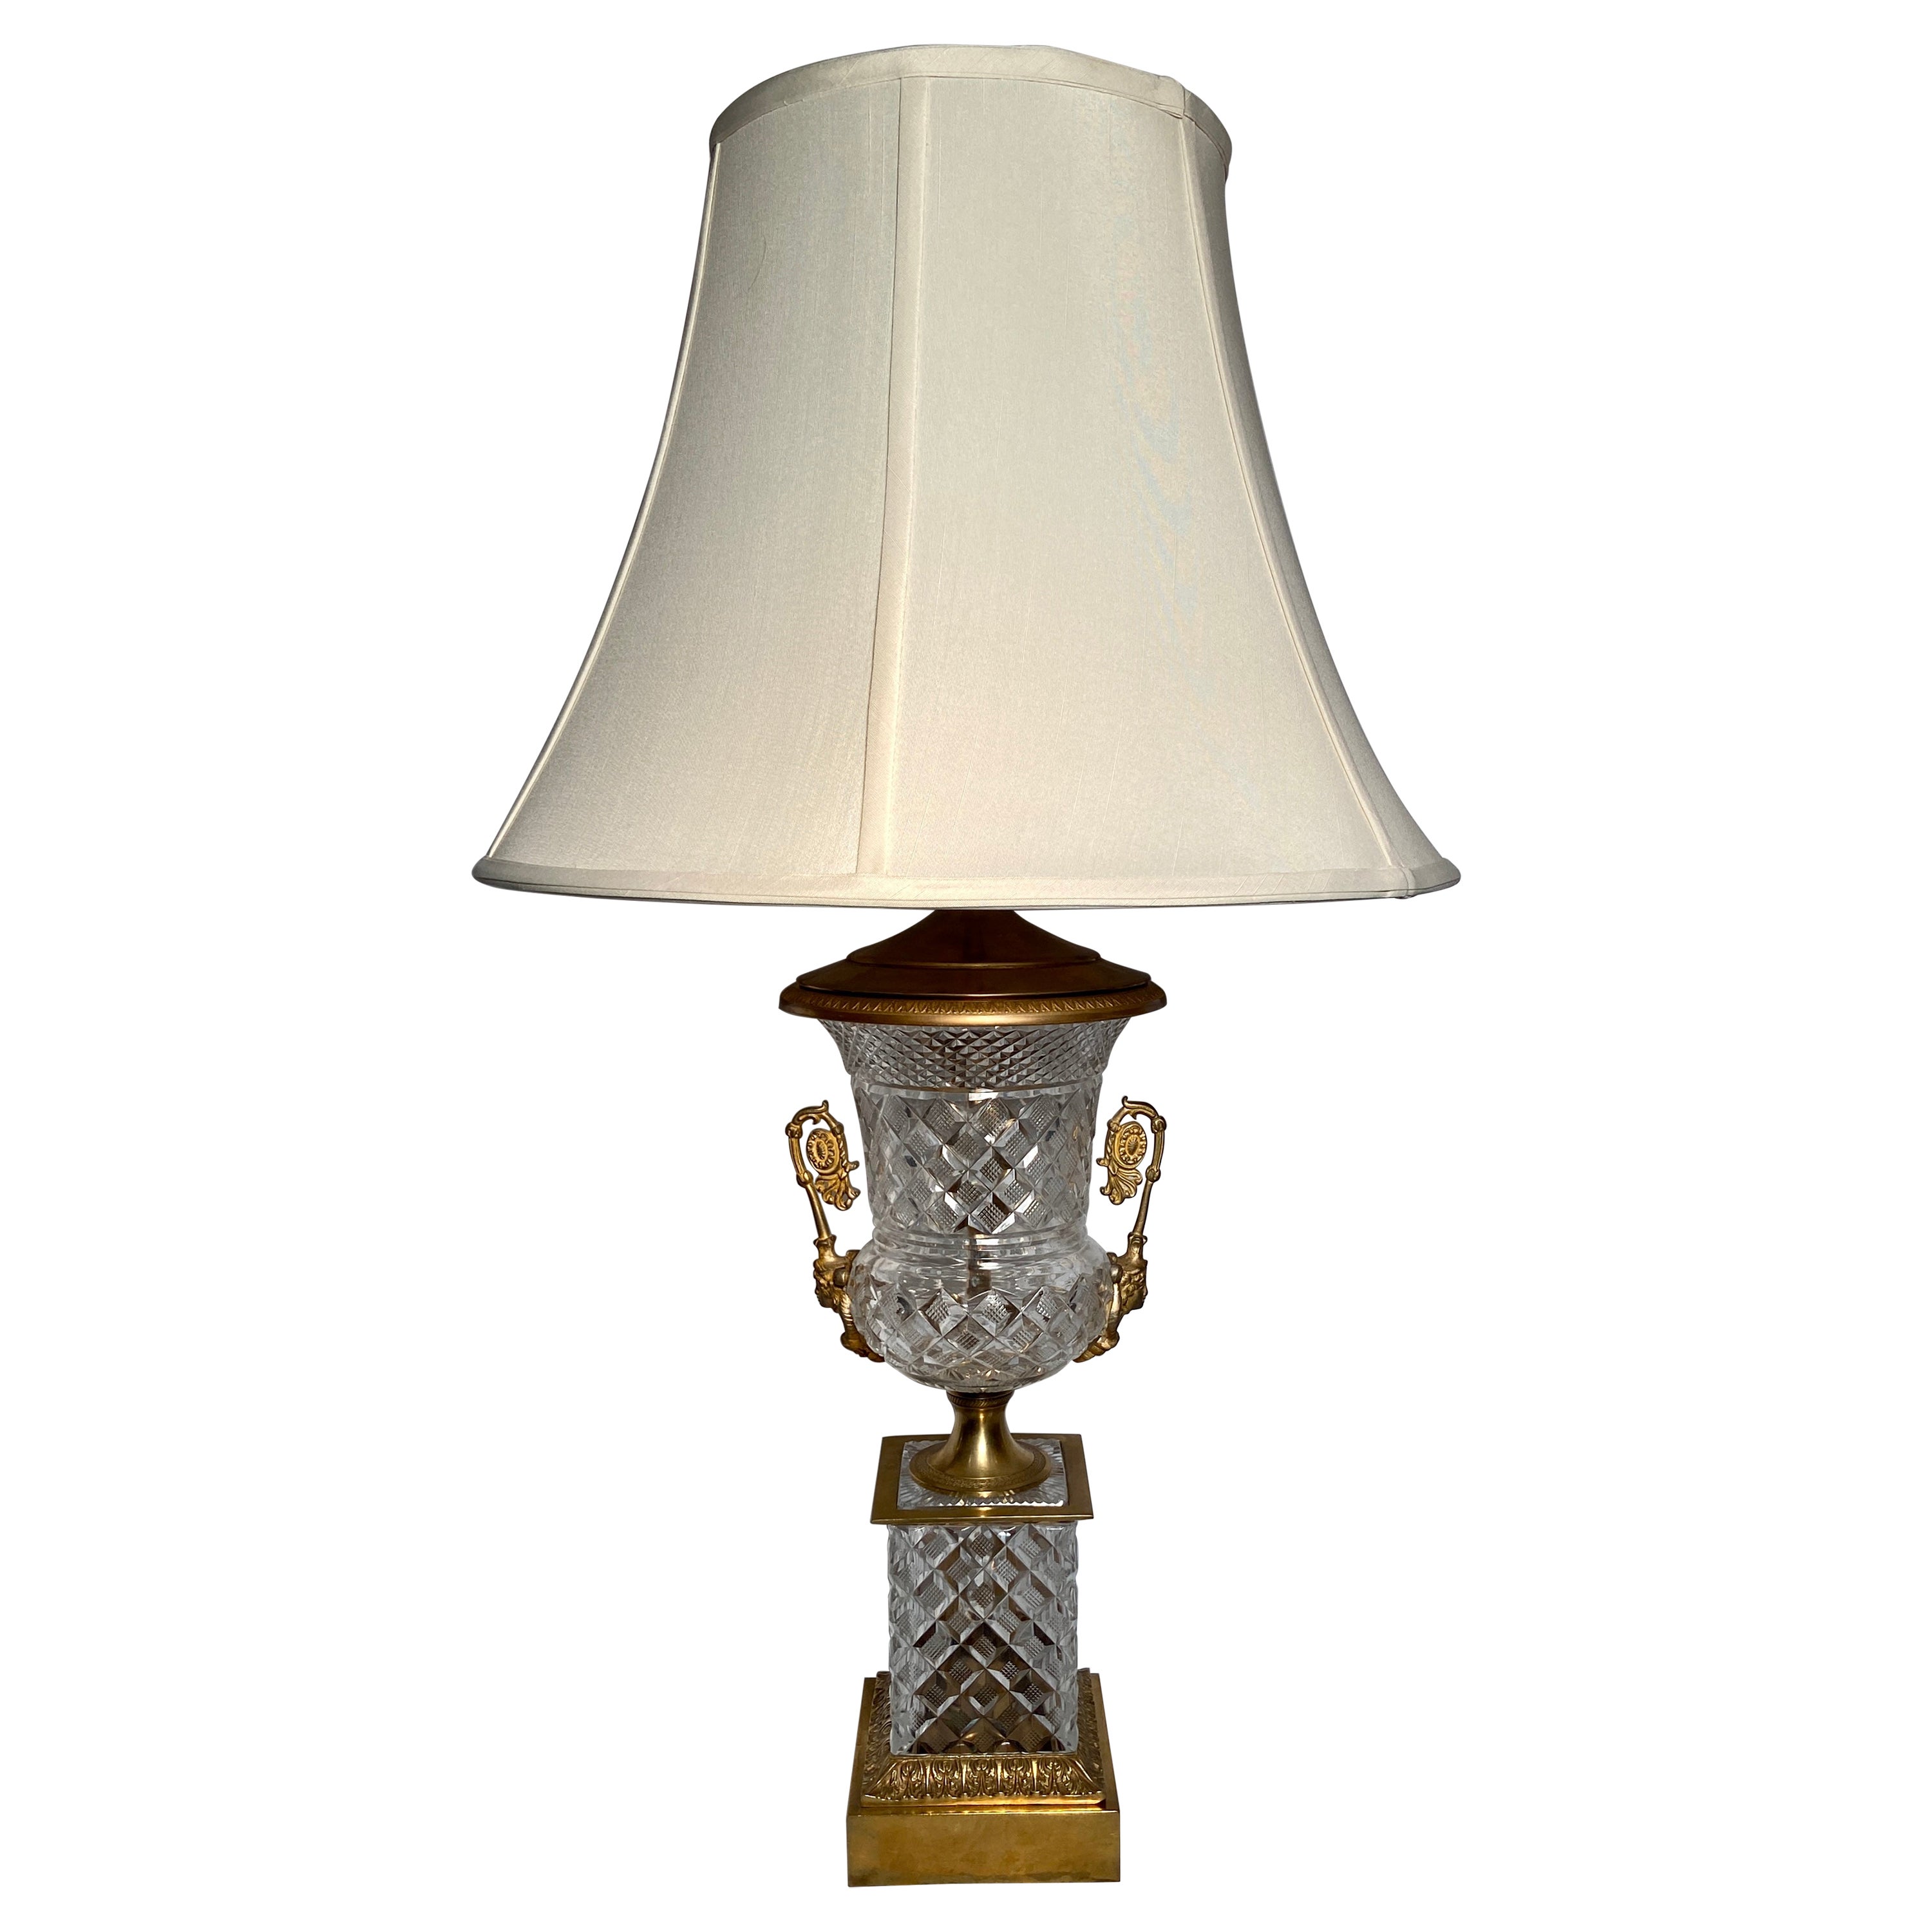 Antique French Cut Crystal and Gold Bronze Lamp, Circa 1900